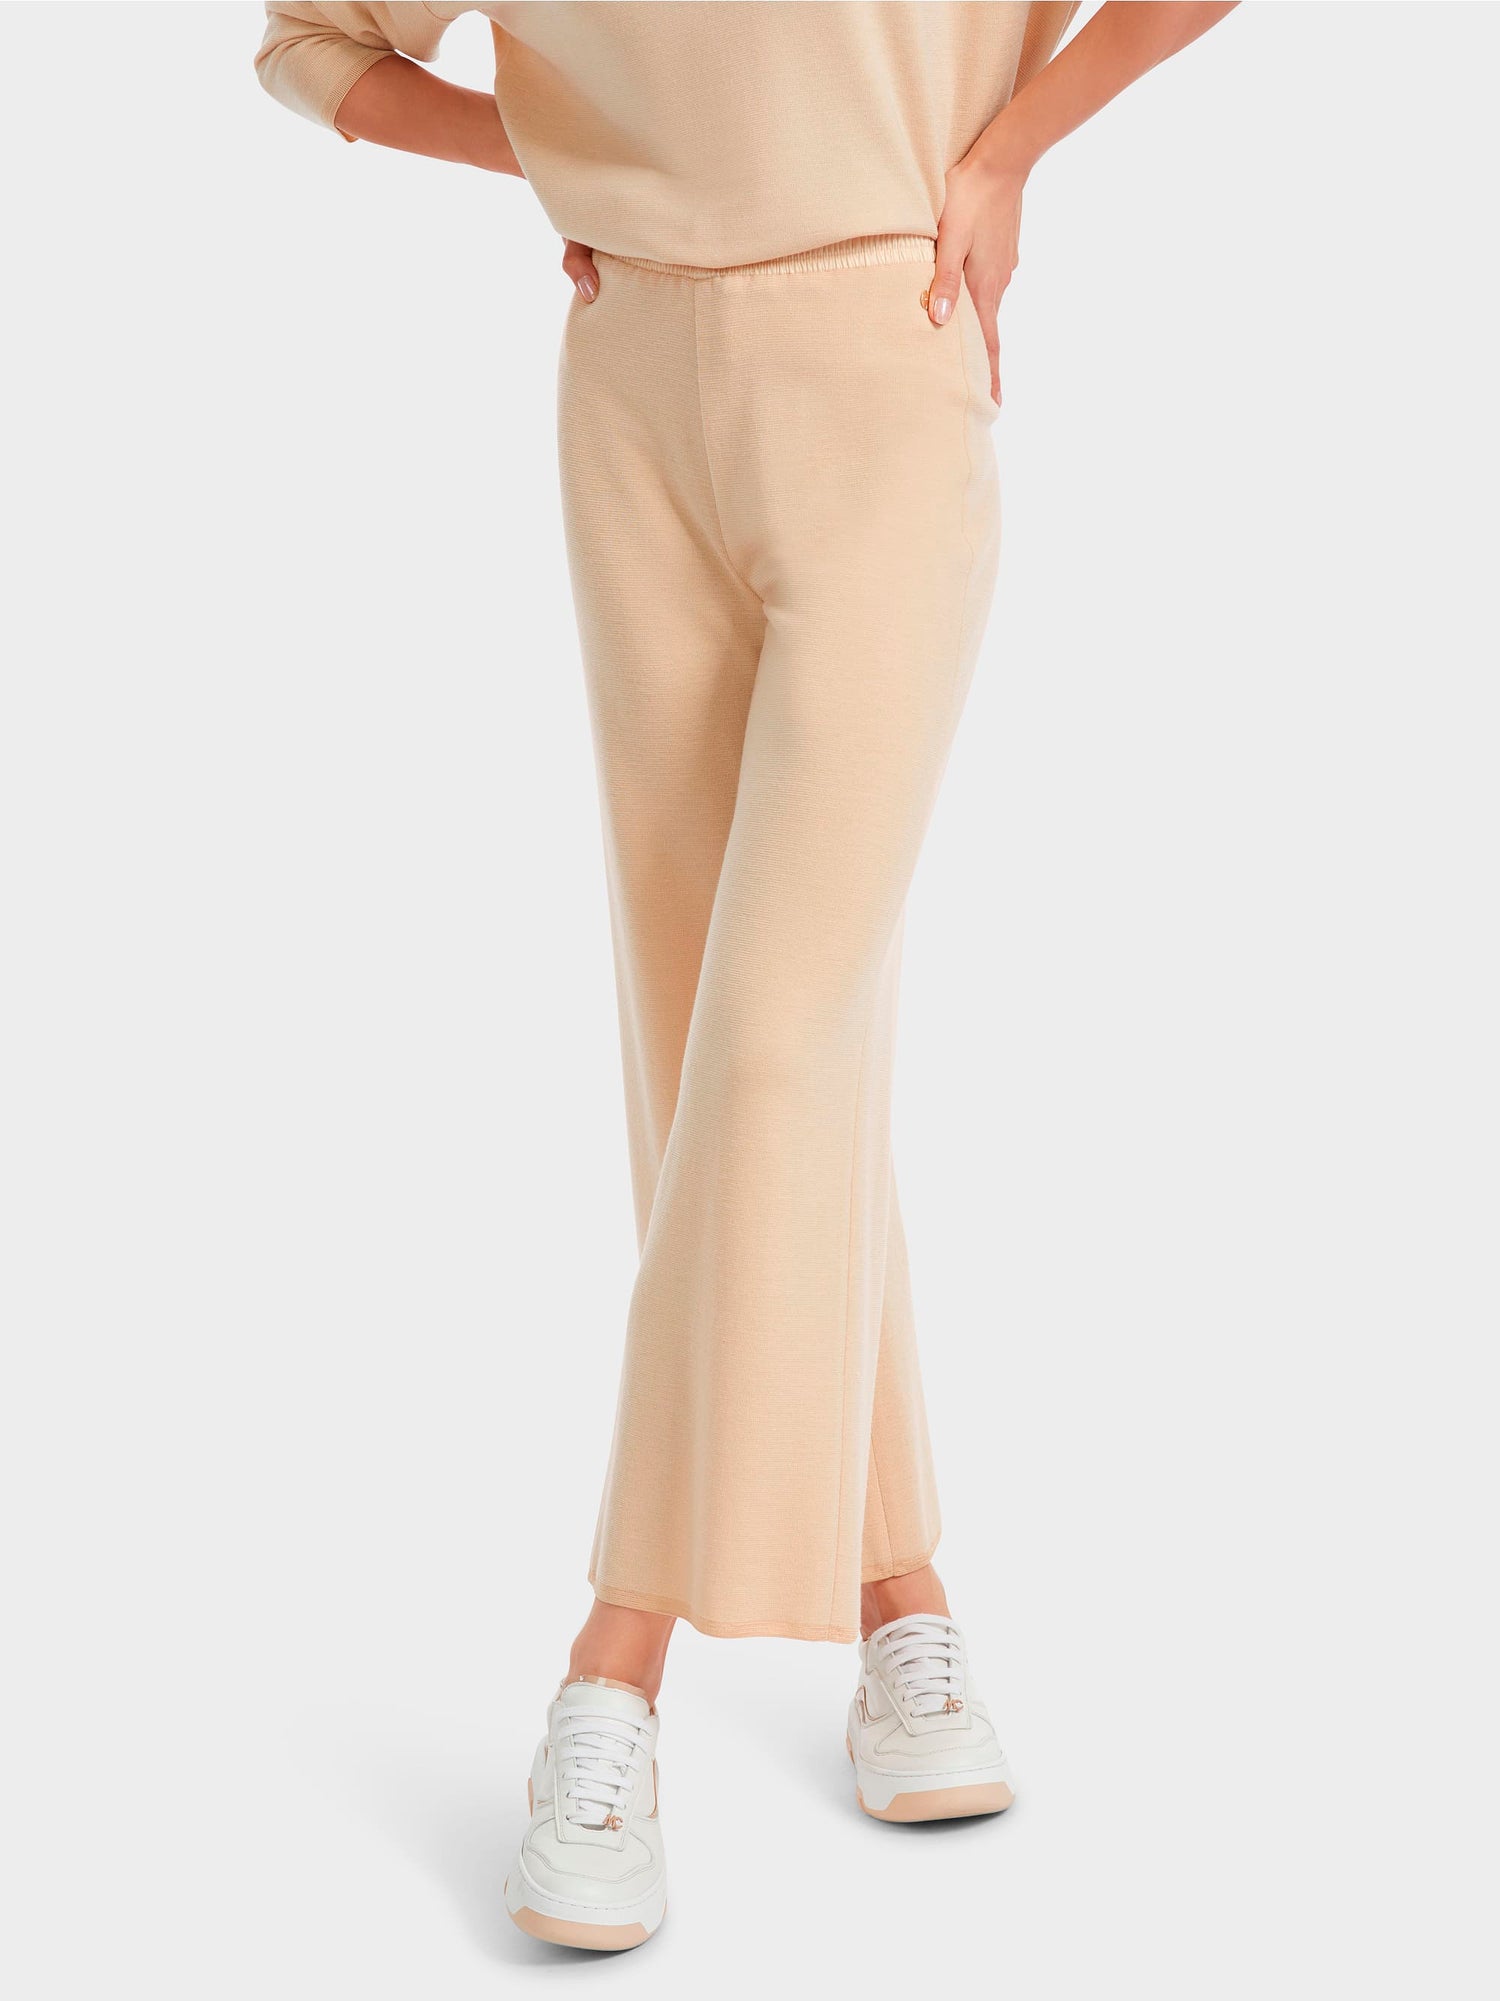 Wool Trousers Knitted In Germany_VC 81.02 M32_132_04